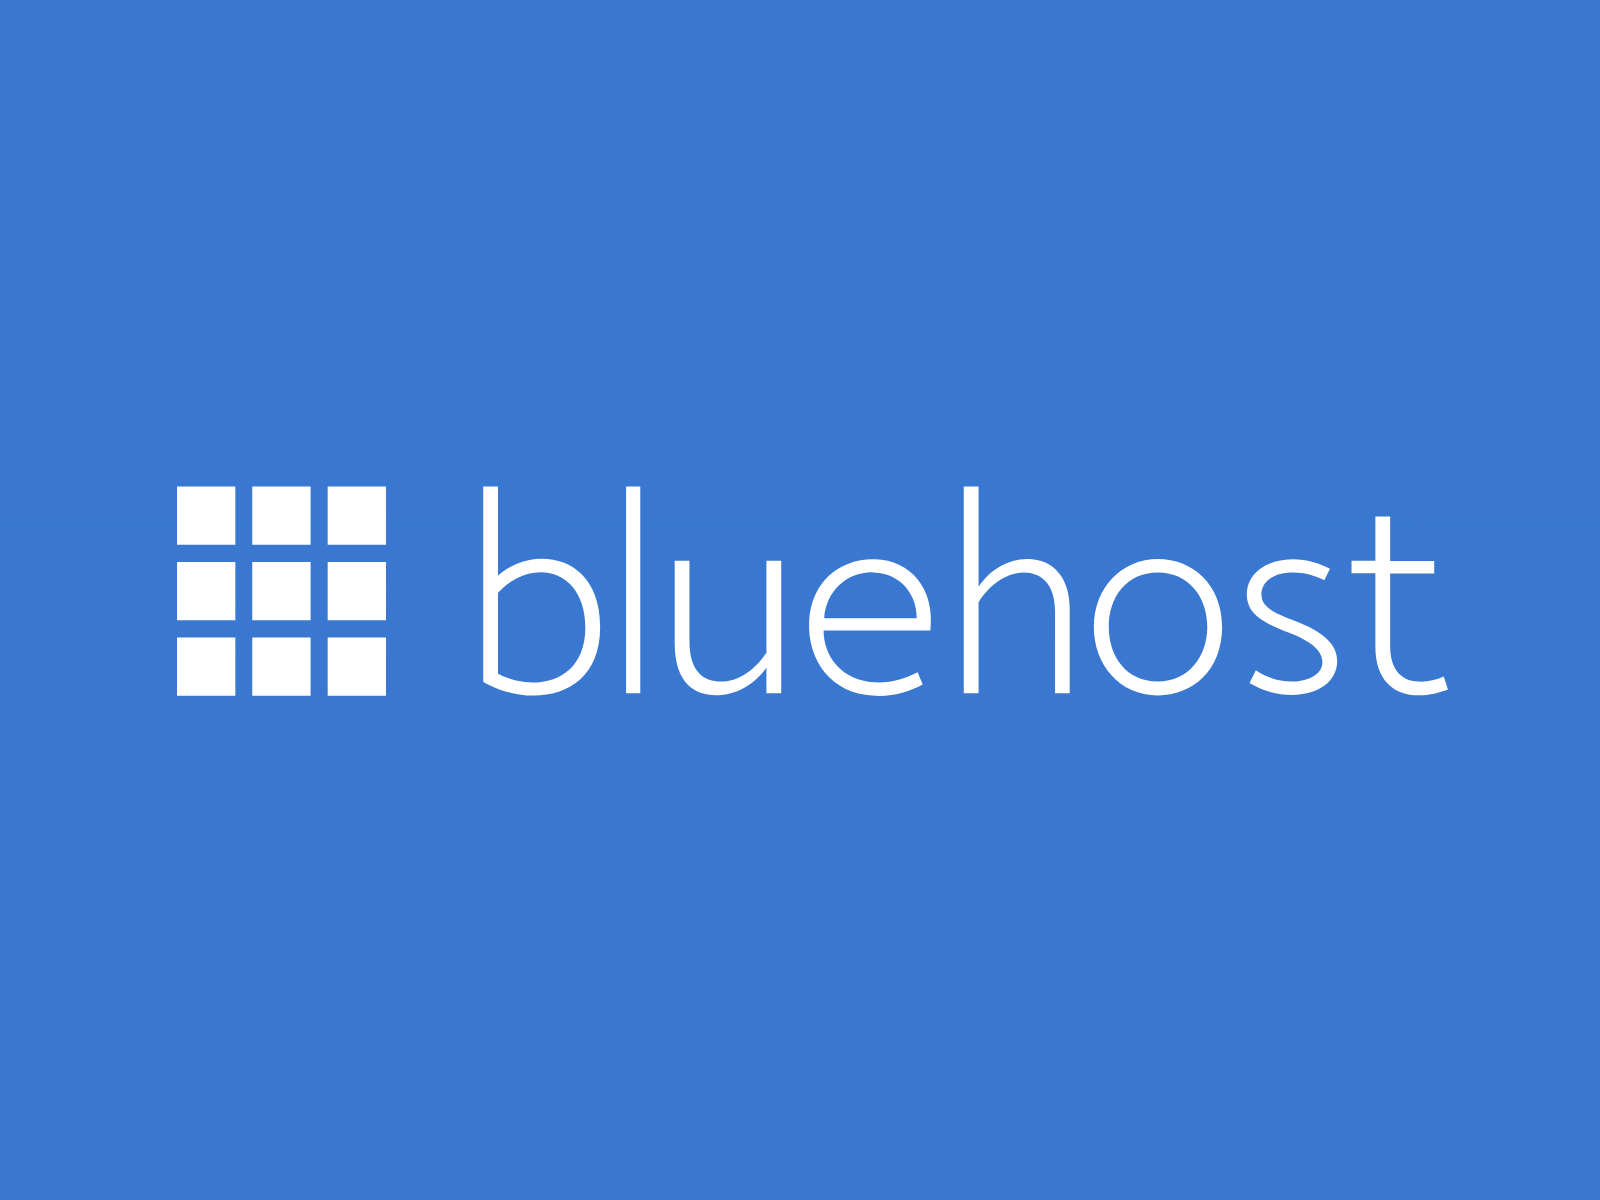 Bluehost brand logo white on blue 1600 px by 1200 px